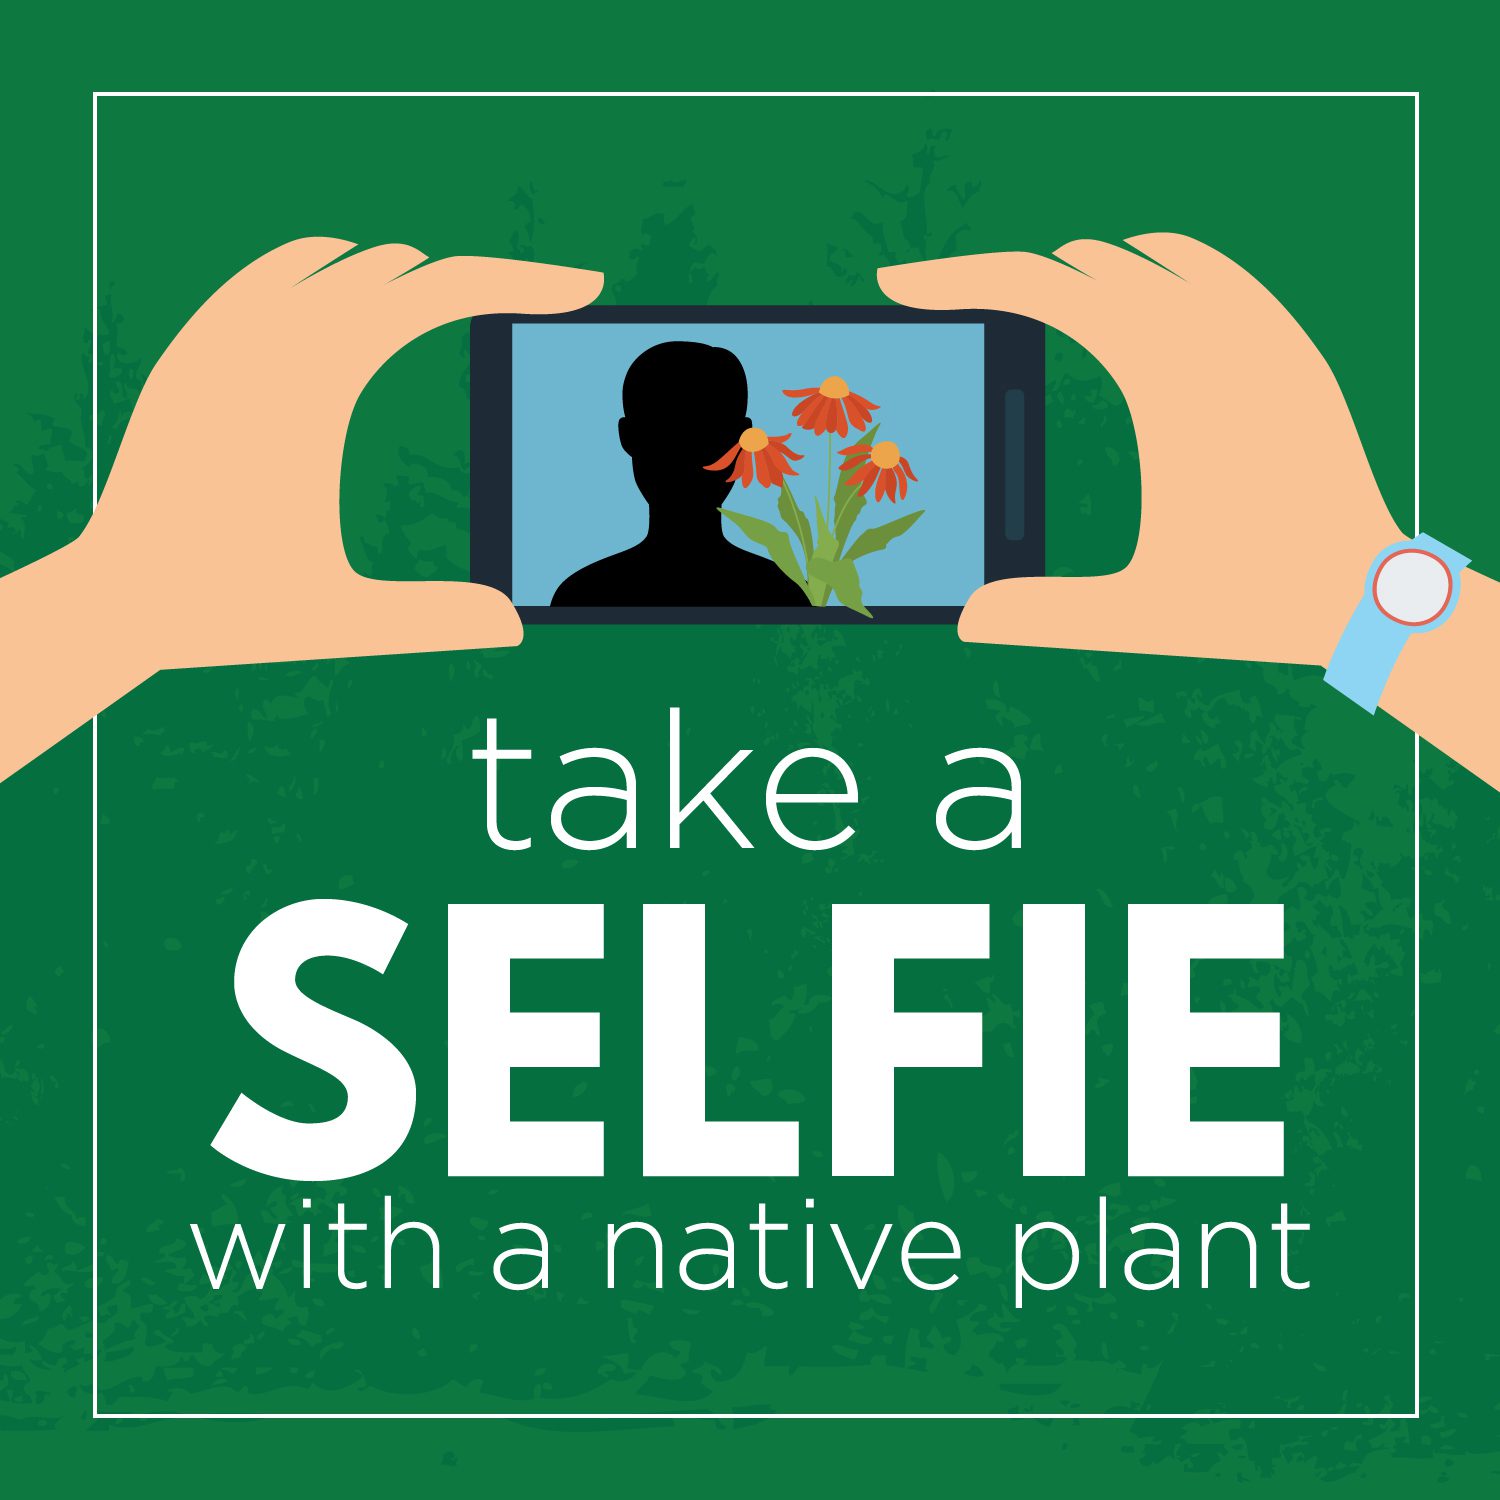 Take a selfie with a native plant